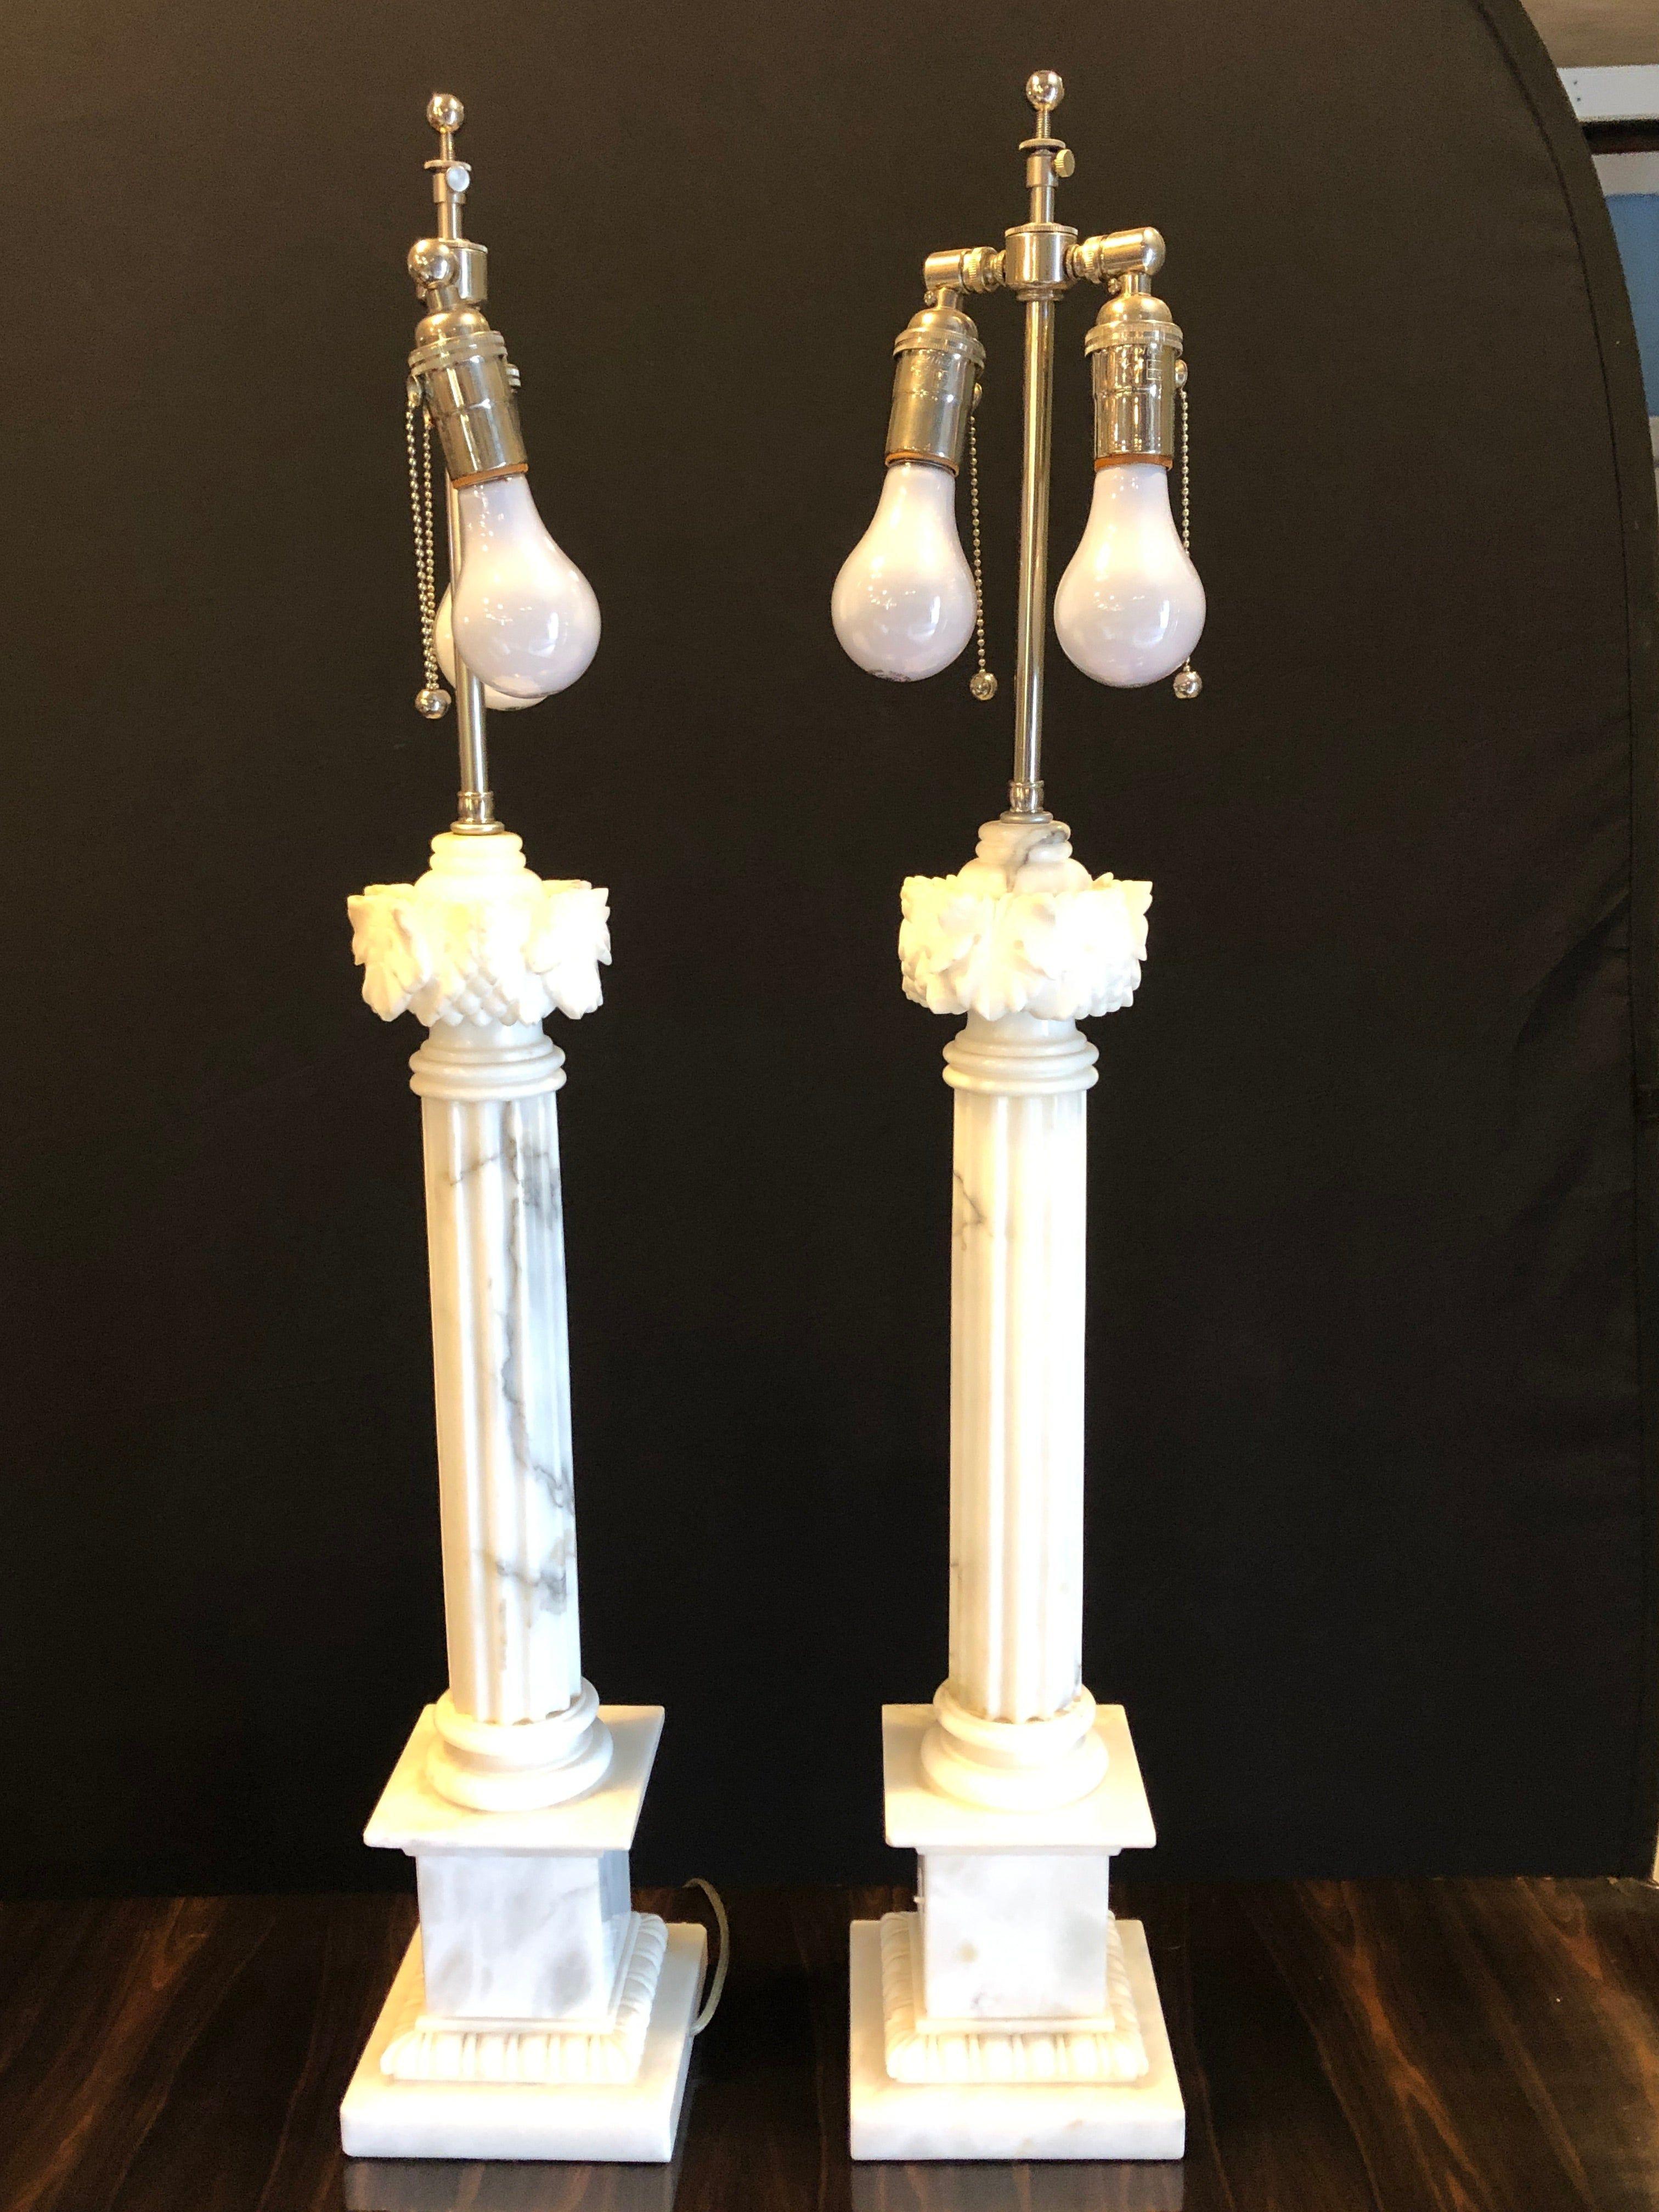 A pair of white and grey veined column marble table lamps with custom shades.
Marble column 24 inches.